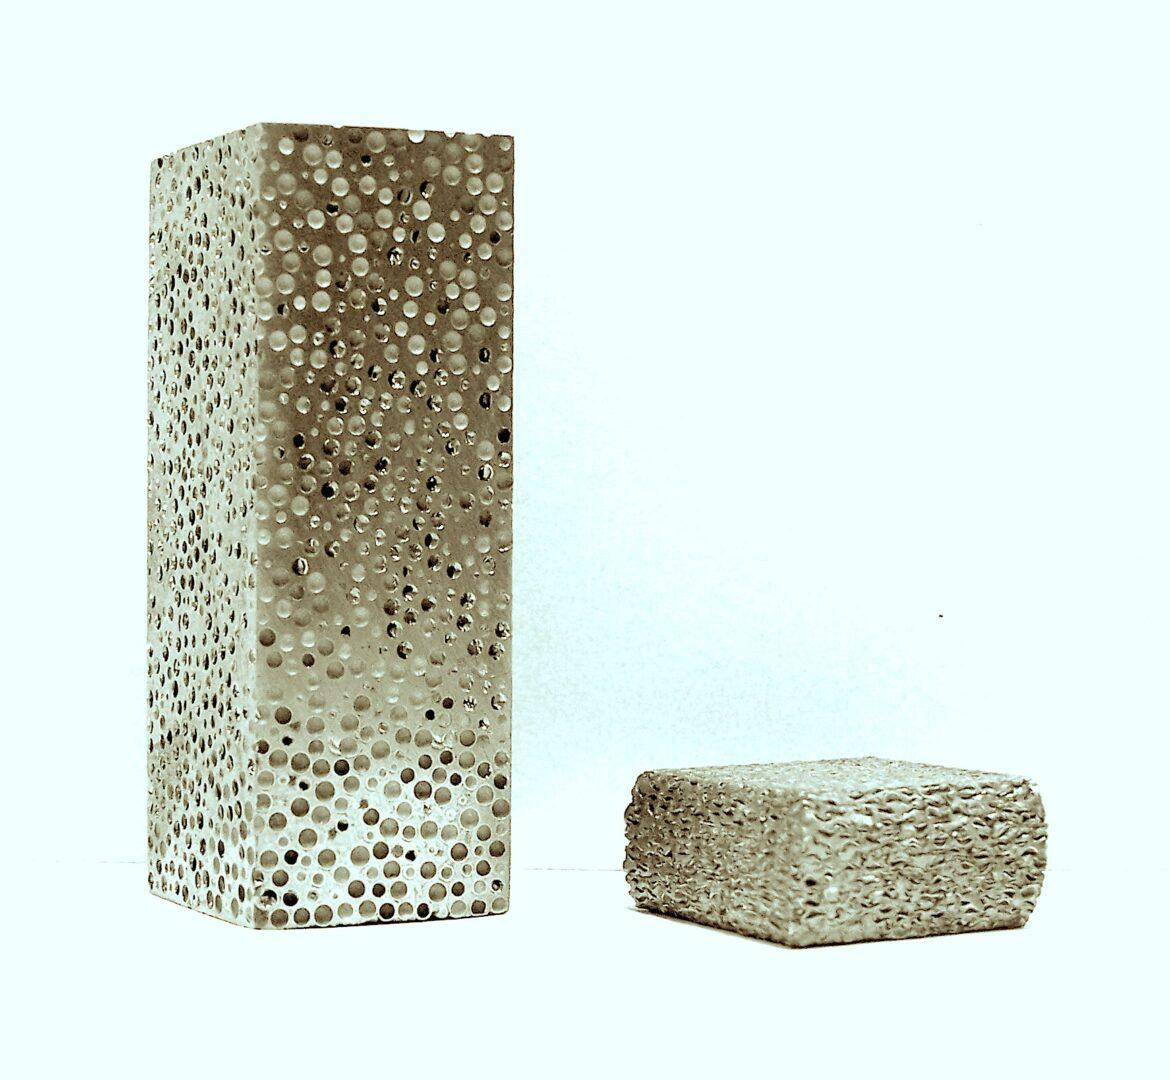 Product Product and Services | Composite Metal Foam | AMM image